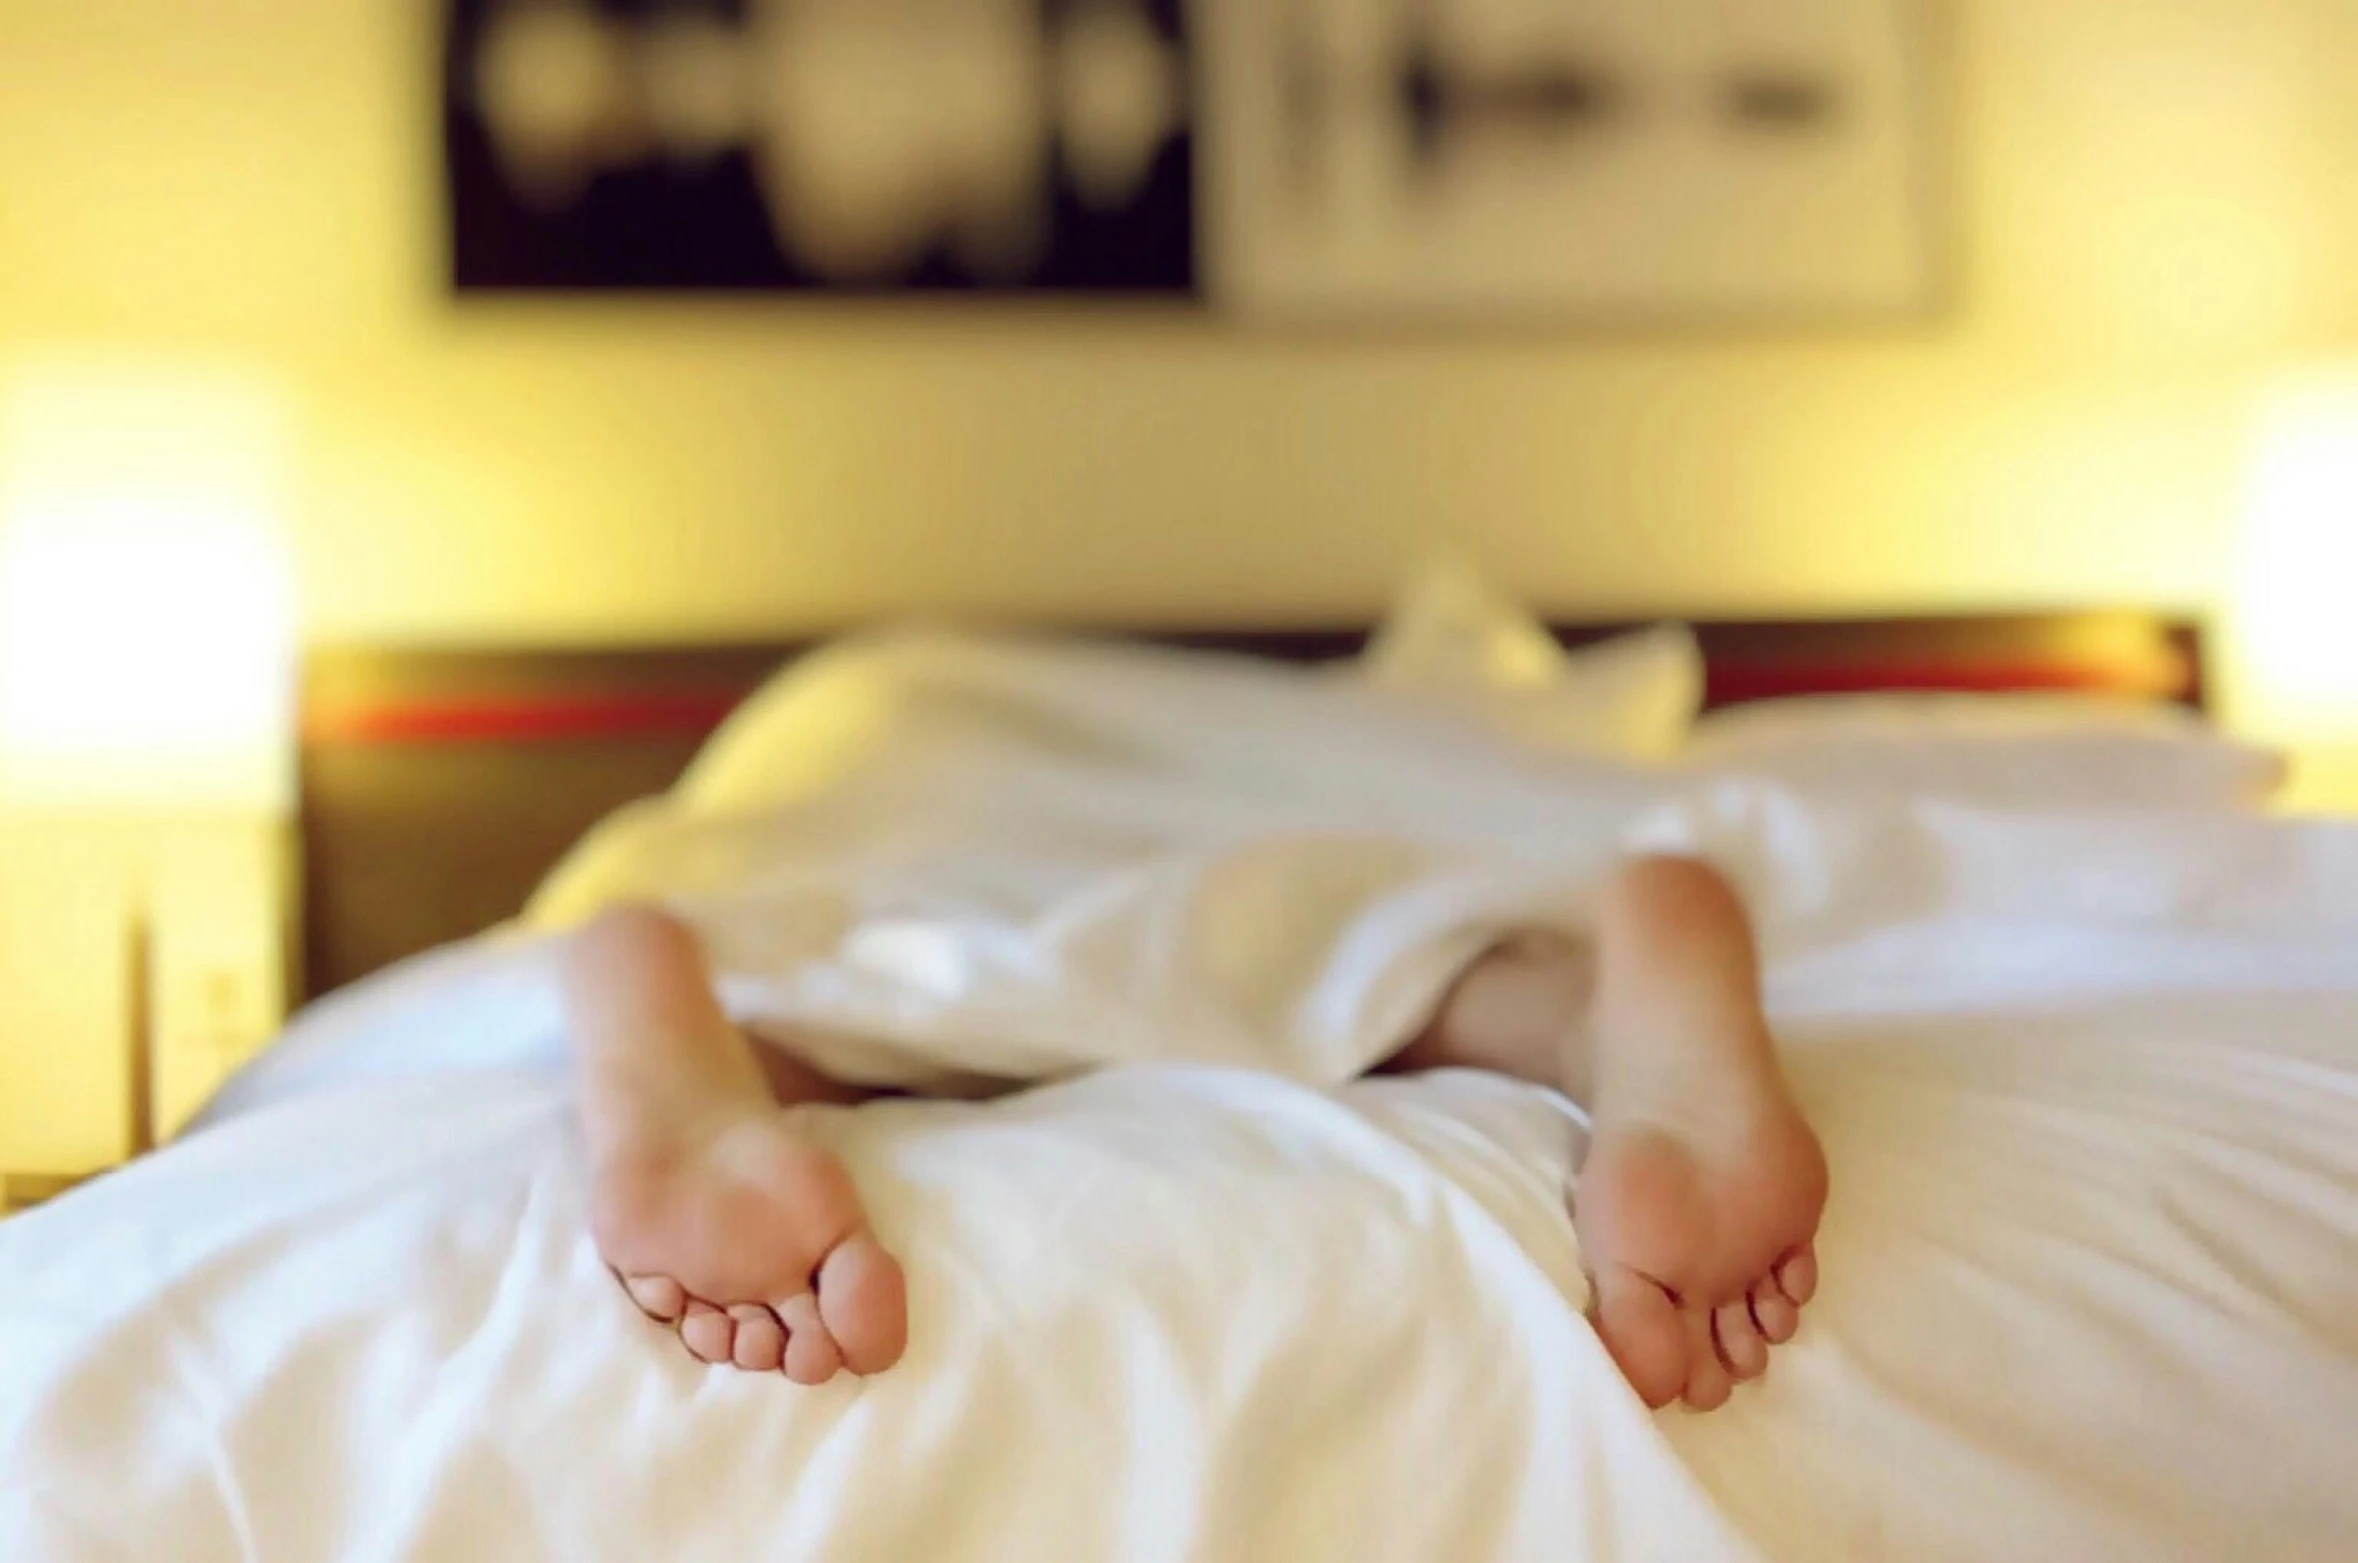 a close up of a person's feet on a bed, pexels, happening, sleepy expression, vibrating, face down, ilustration